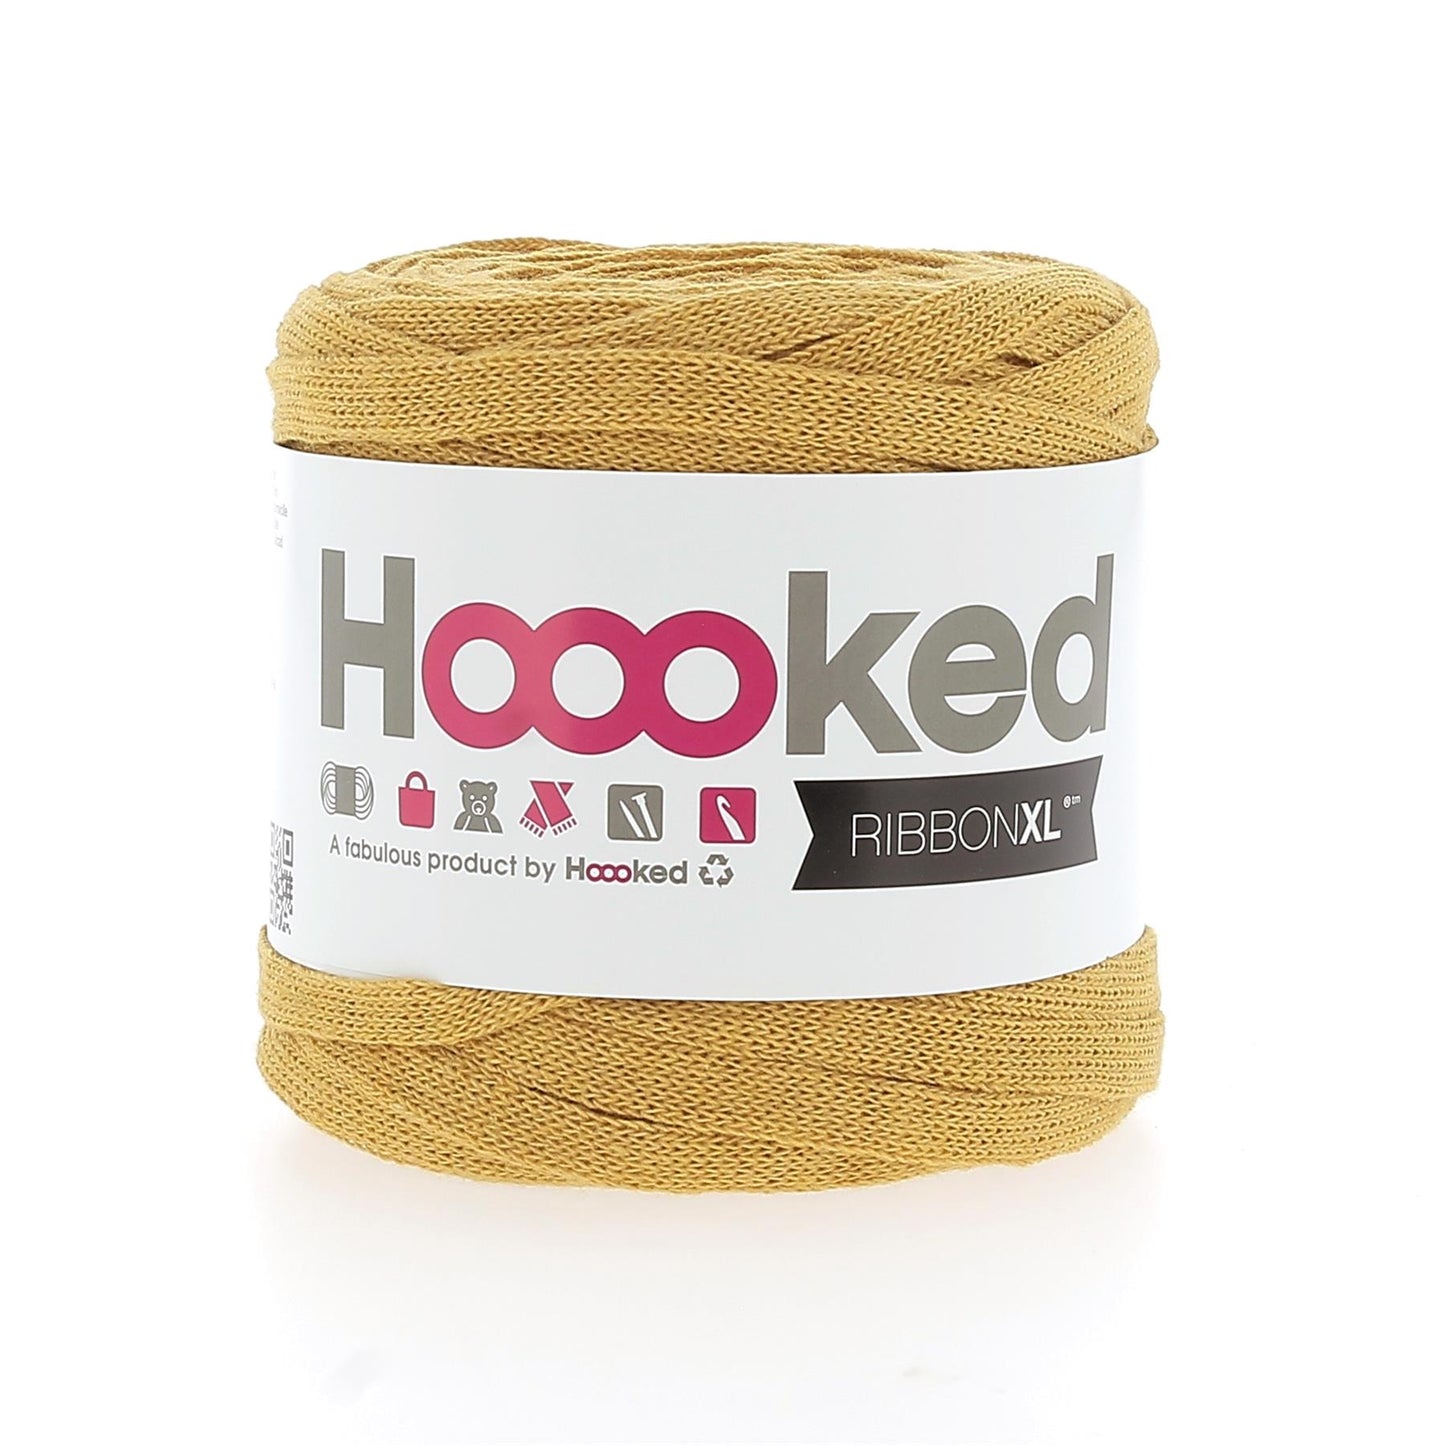 [Hoooked] RXL53MINI RibbonXL Harvest Ocre Cotton Yarn - 60M, 125g